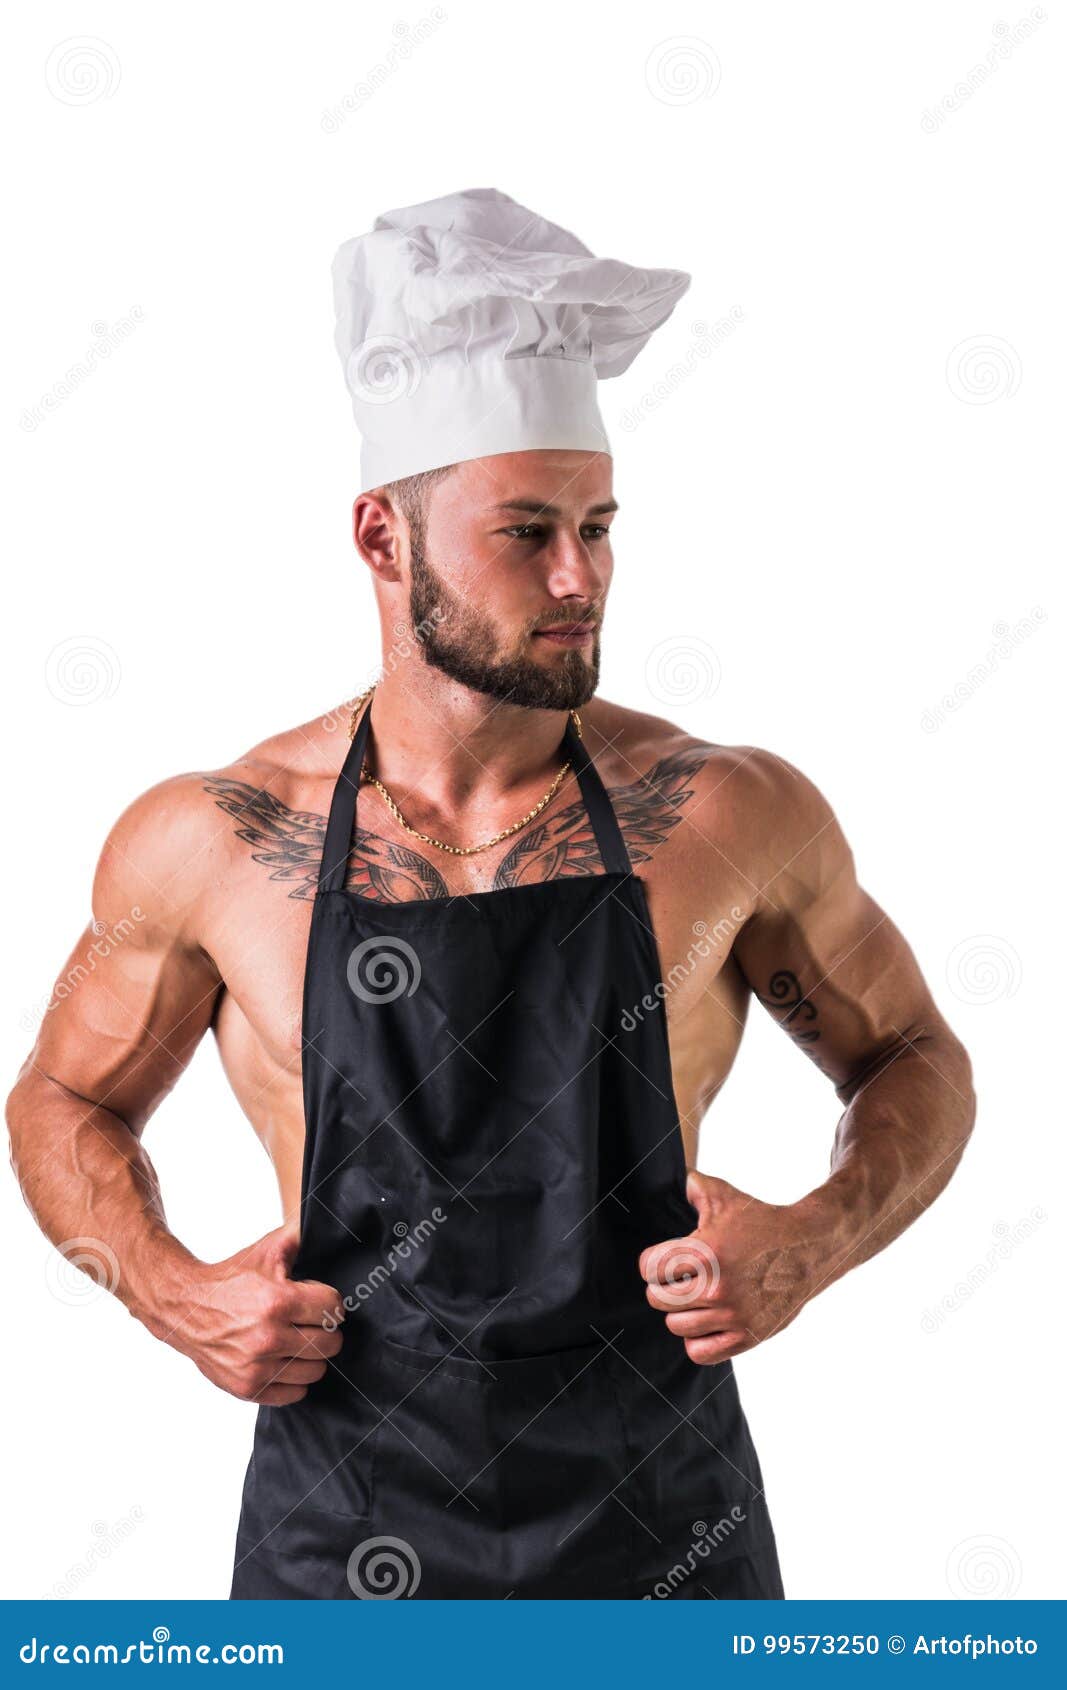 Shirtless Male Cooker With Apron Posing In A Kitchen Stock Images My 